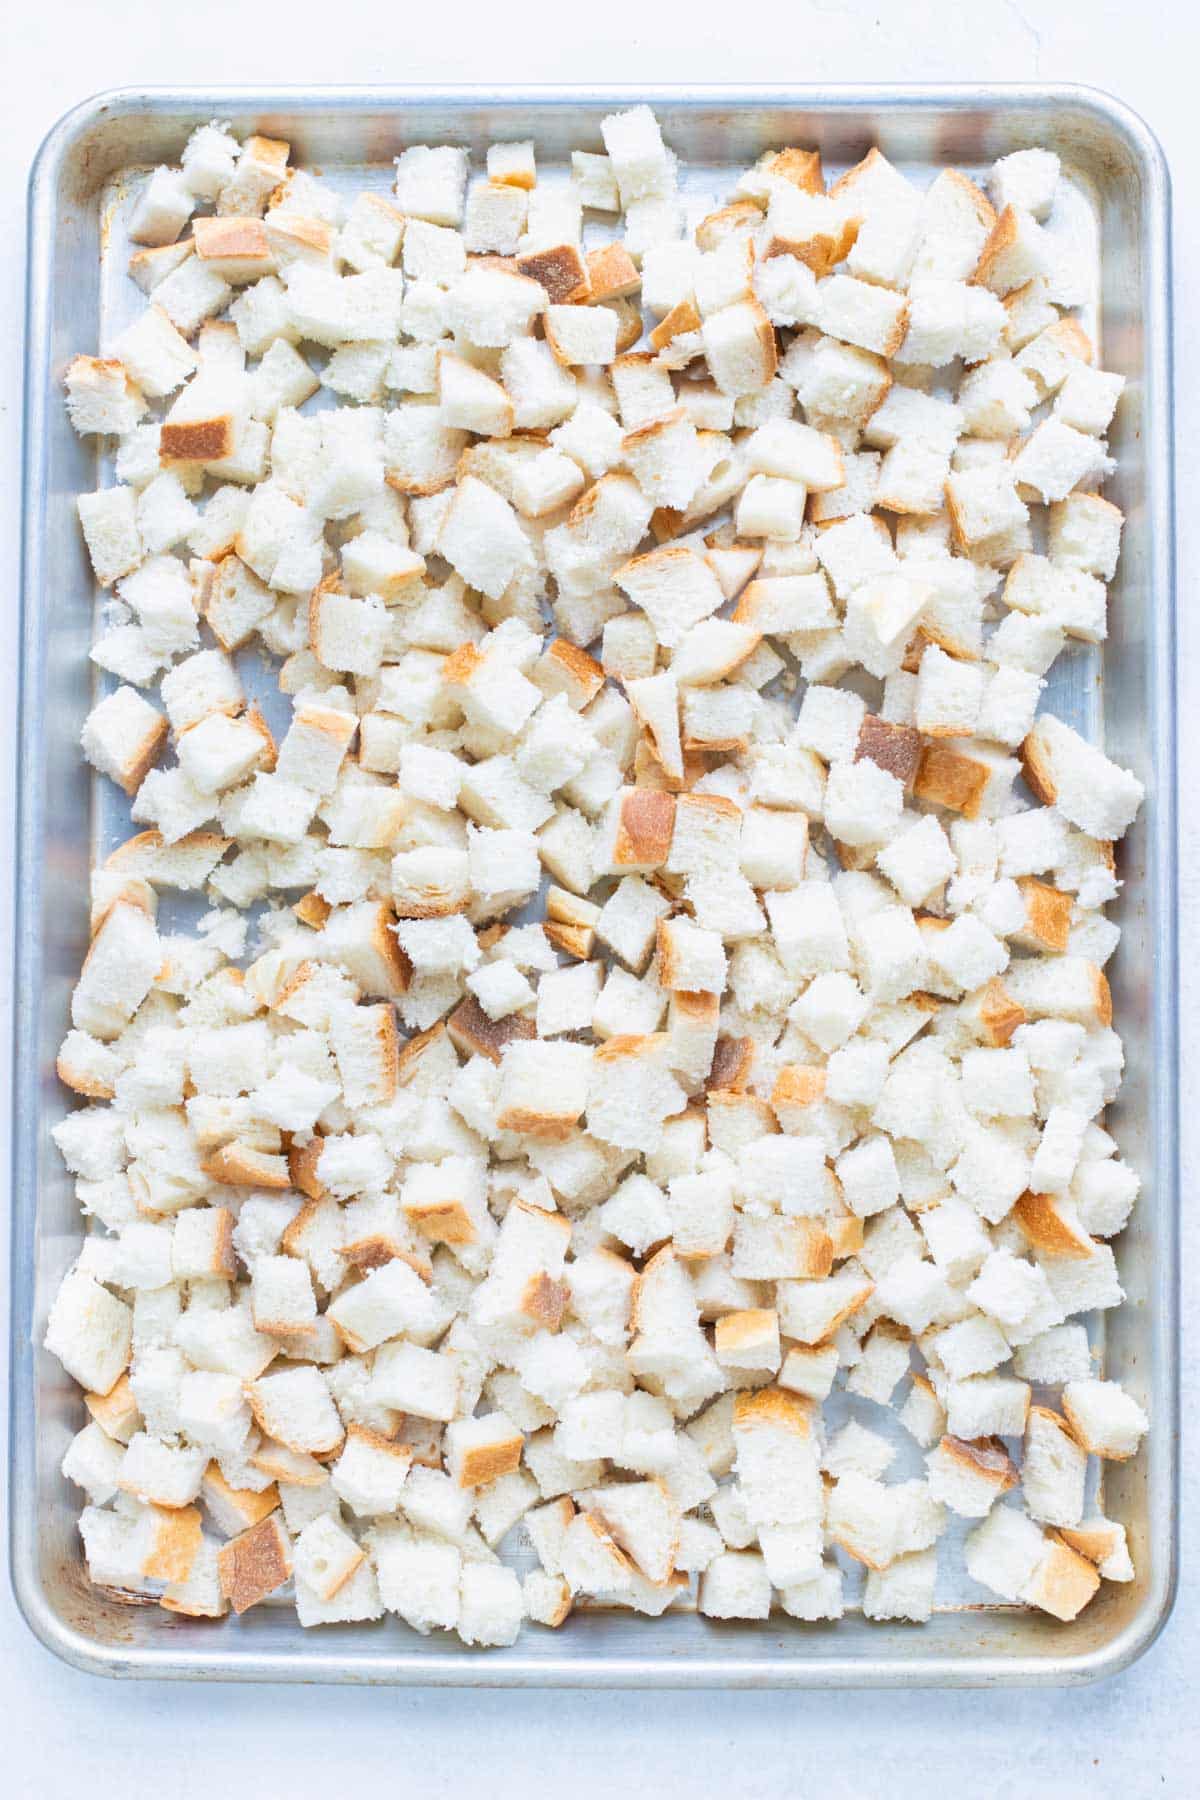 Bread cubes are placed on a baking sheet and toasted in the oven.